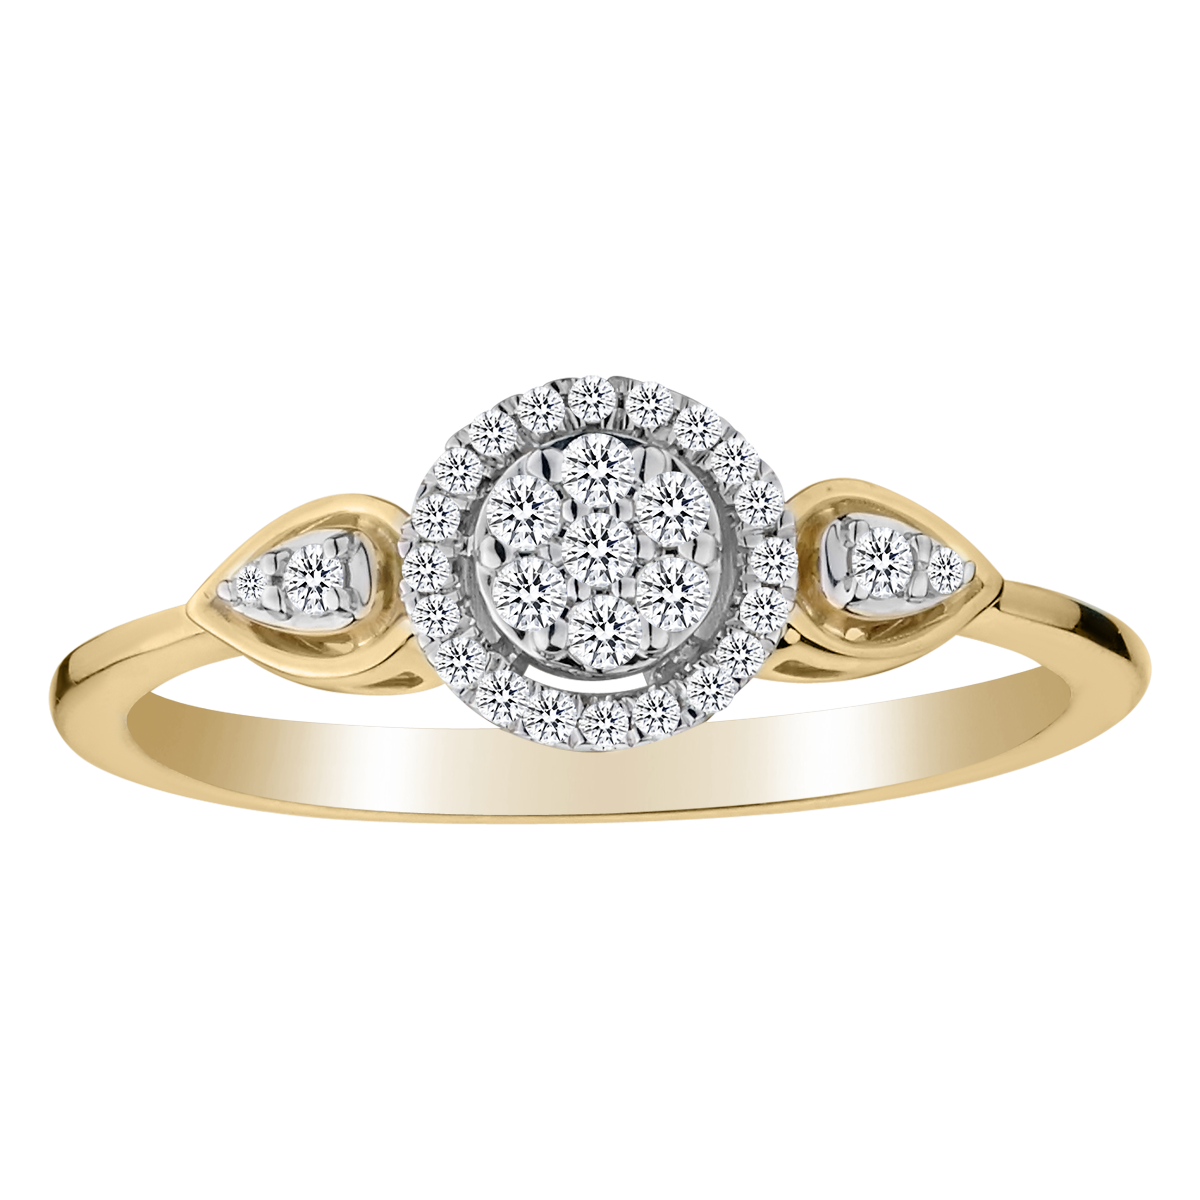 .15 Carat of Diamonds "Past, Present, Future" Ring, 10kt Yellow Gold......................NOW